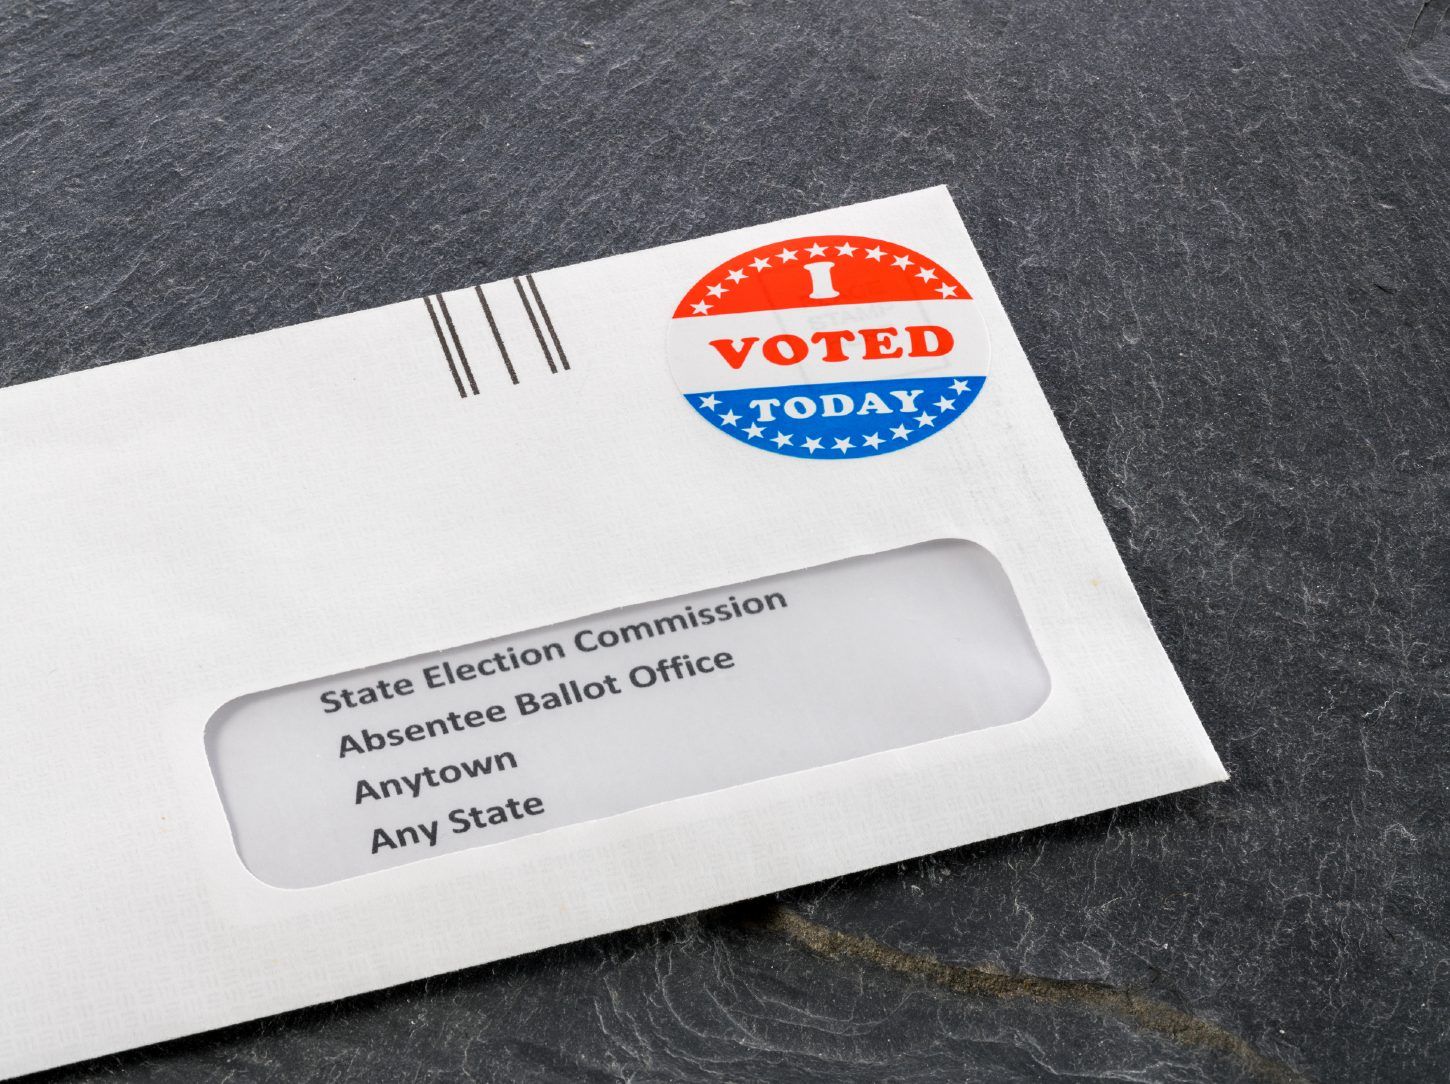 Envelope addressed to state election commission with an "I voted today" sticker in place of a stamp - voting by mail